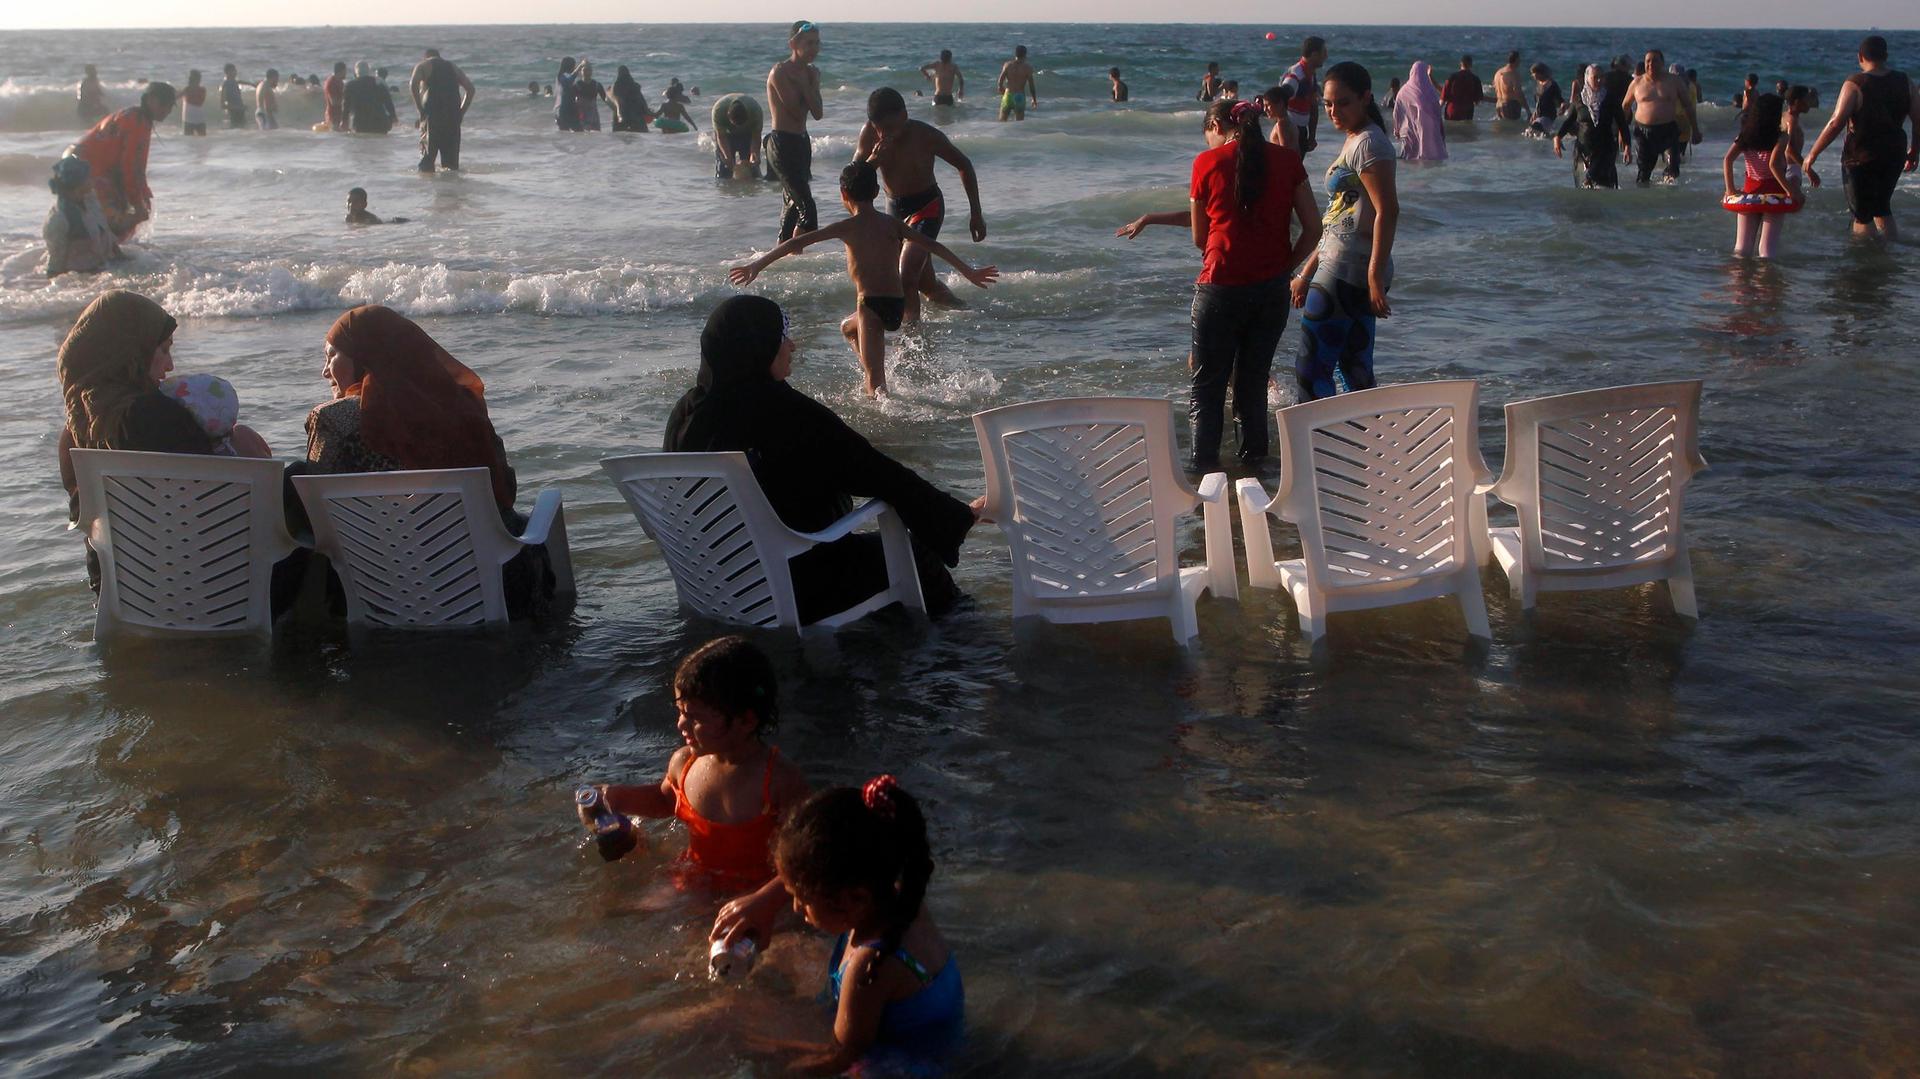 Women wearing headscarves sit in chairs at a public beach in Alexandria, Egypt